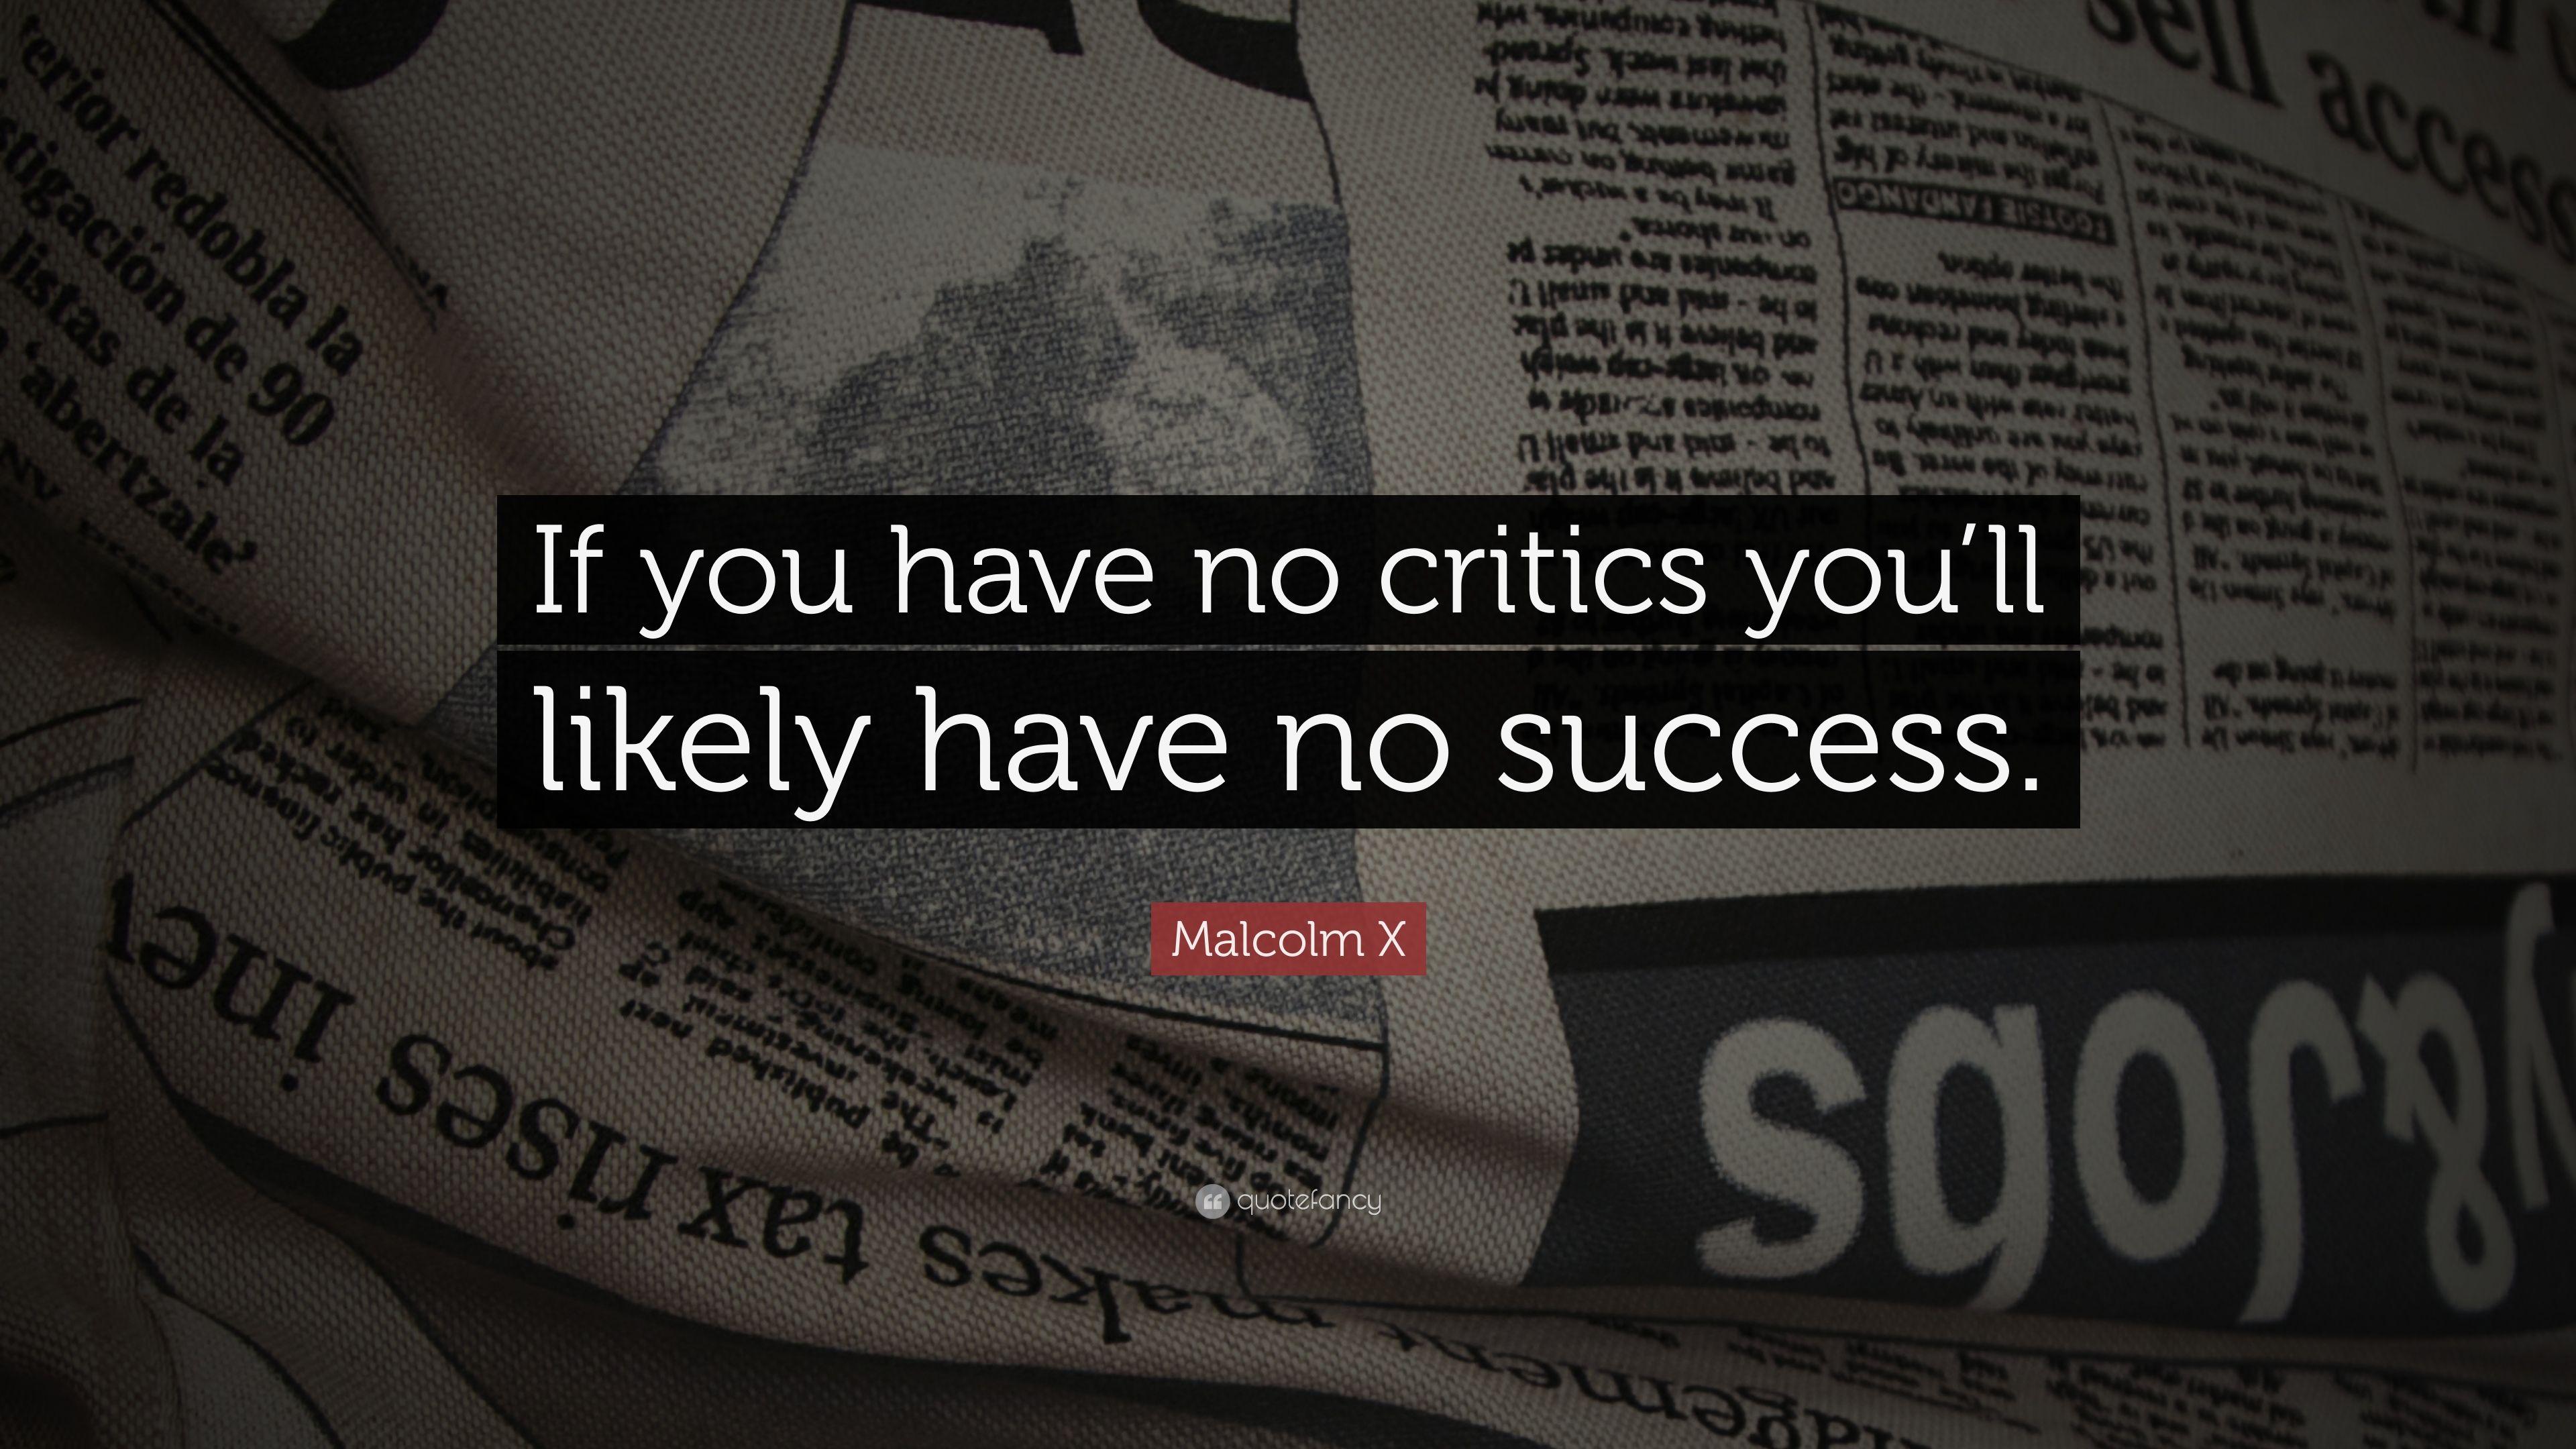 Malcolm X Quote: “If you have no critics you'll likely have no